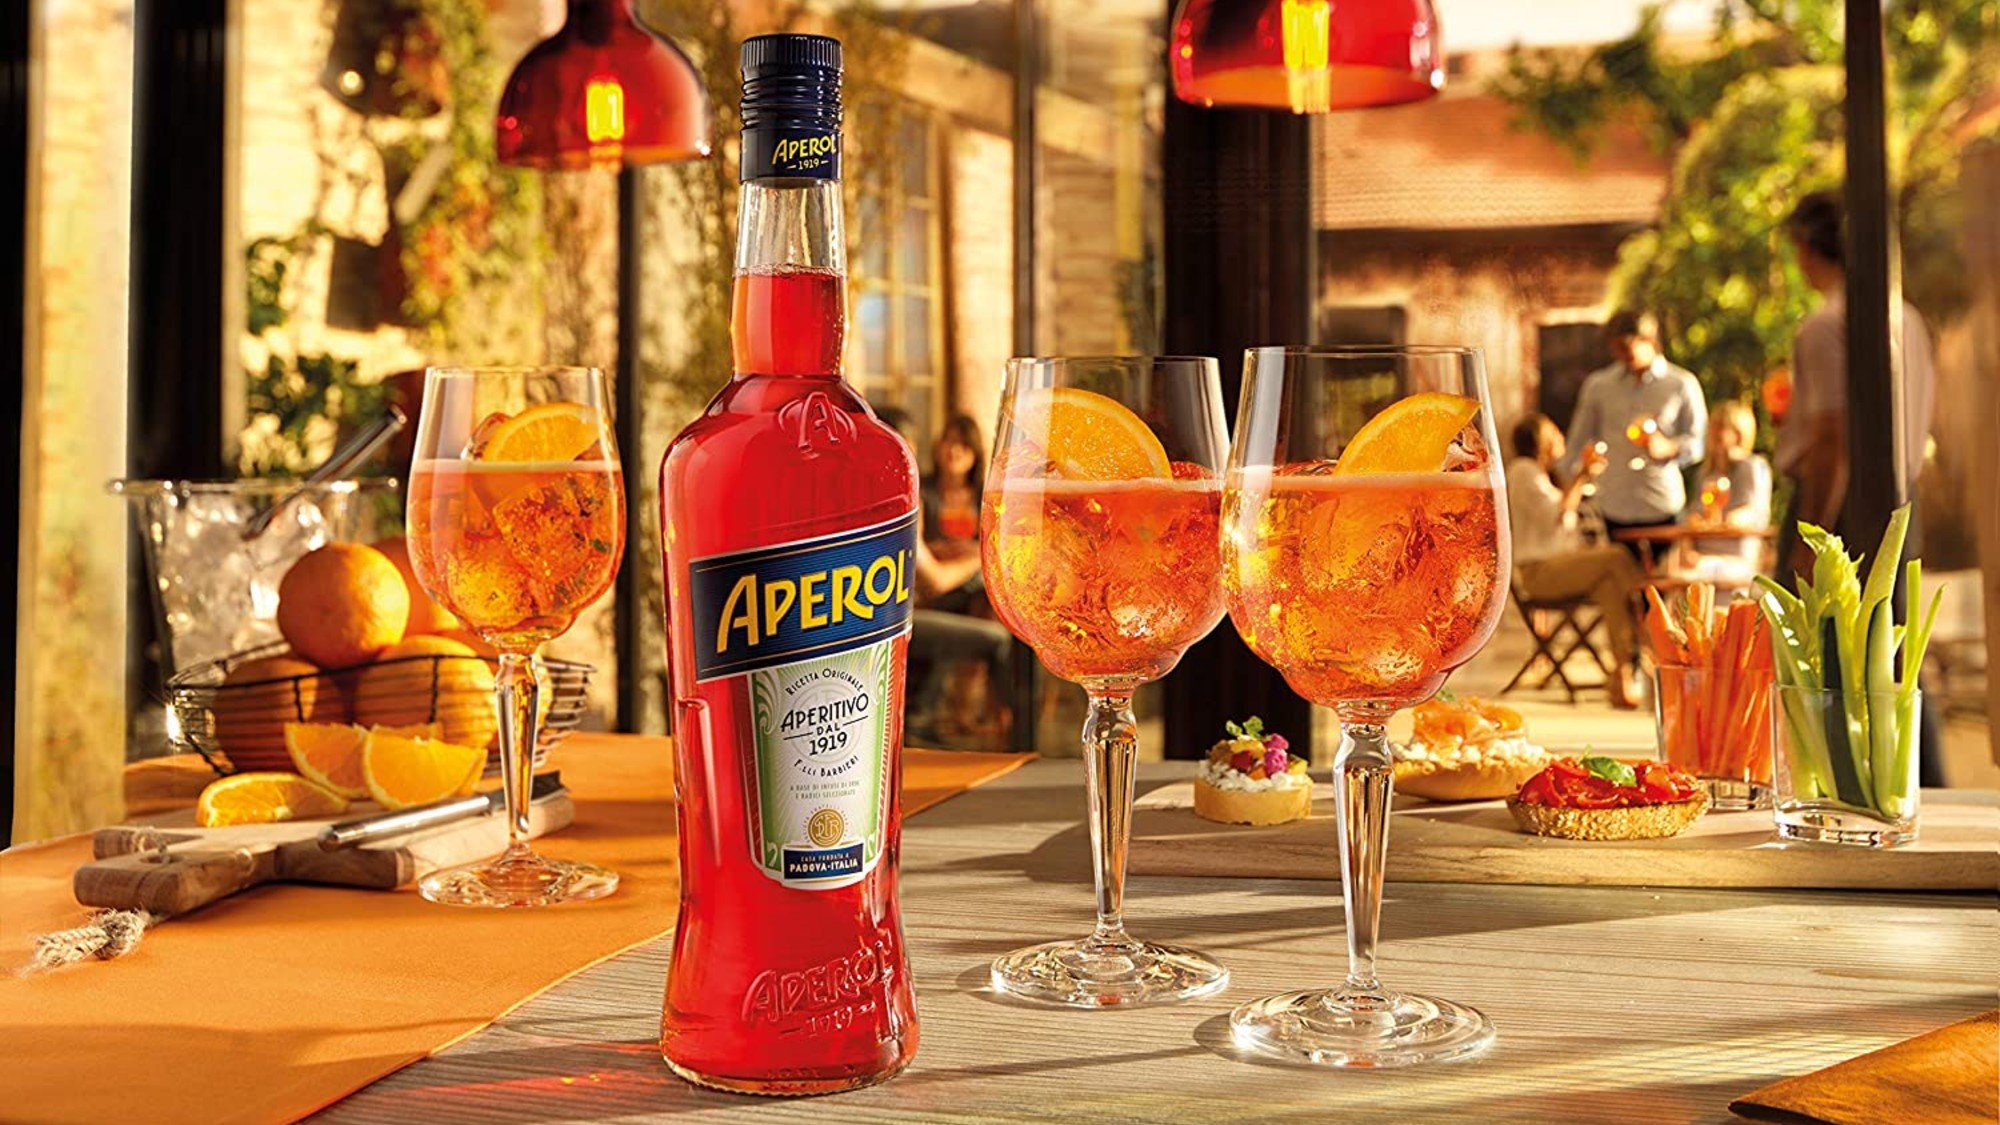 My holiday was cancelled, so I'm stockpiling this Aperol Spritz Prime Day deal instead